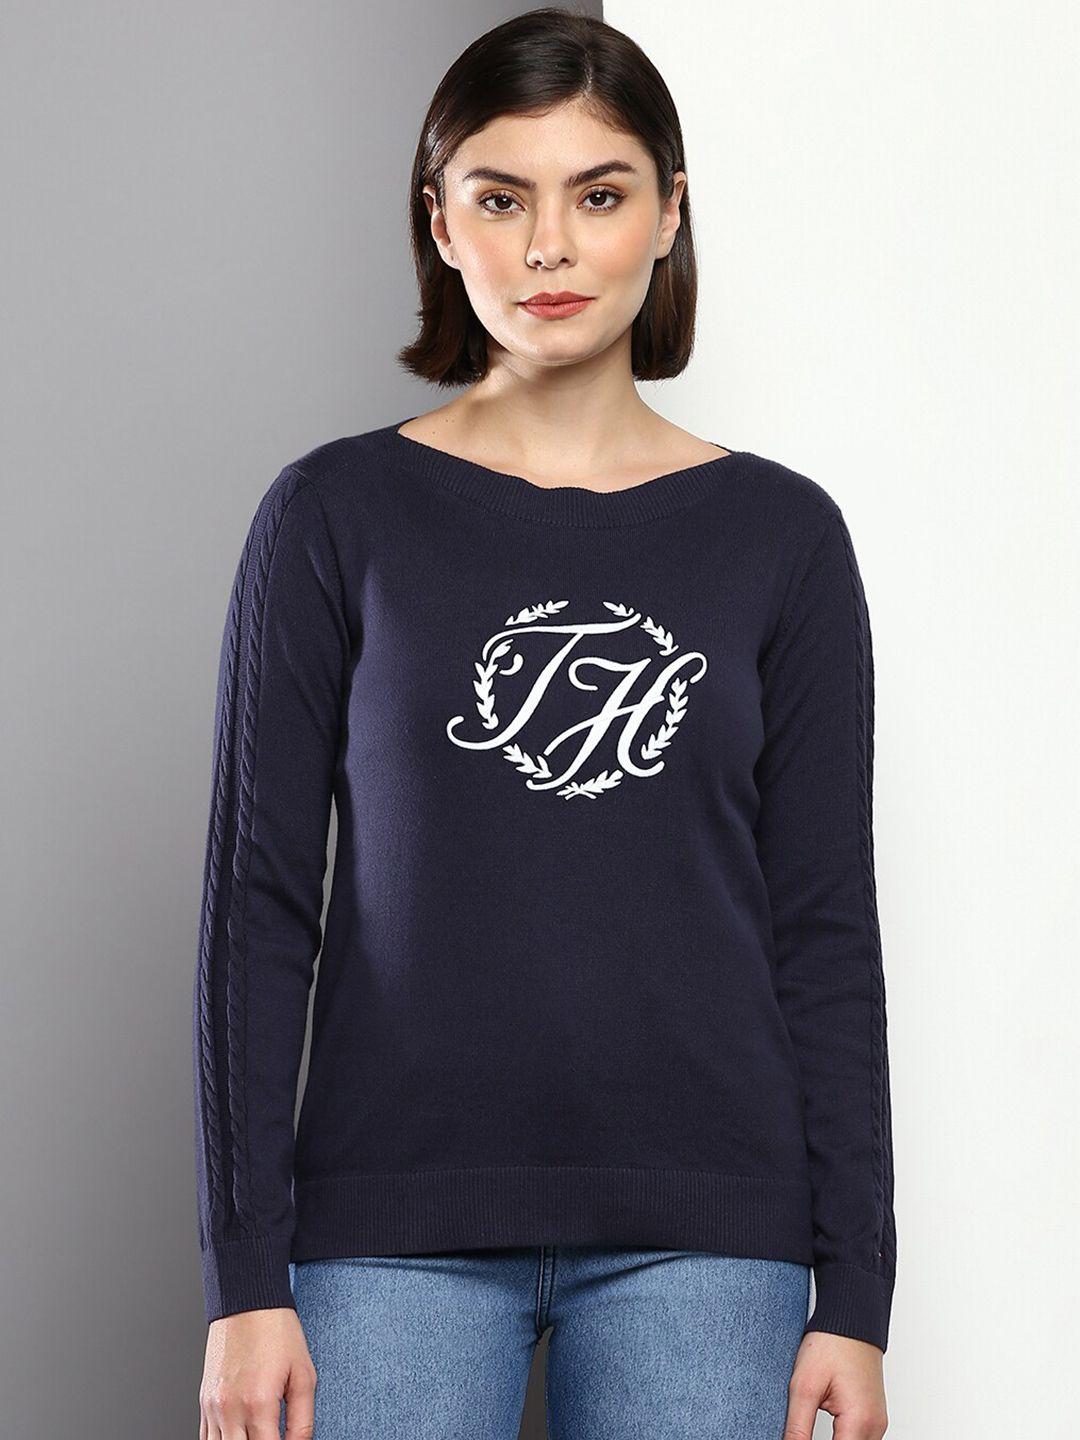 tommy-hilfiger-women-navy-blue-&-white-embroidered-pure-cotton-pullover